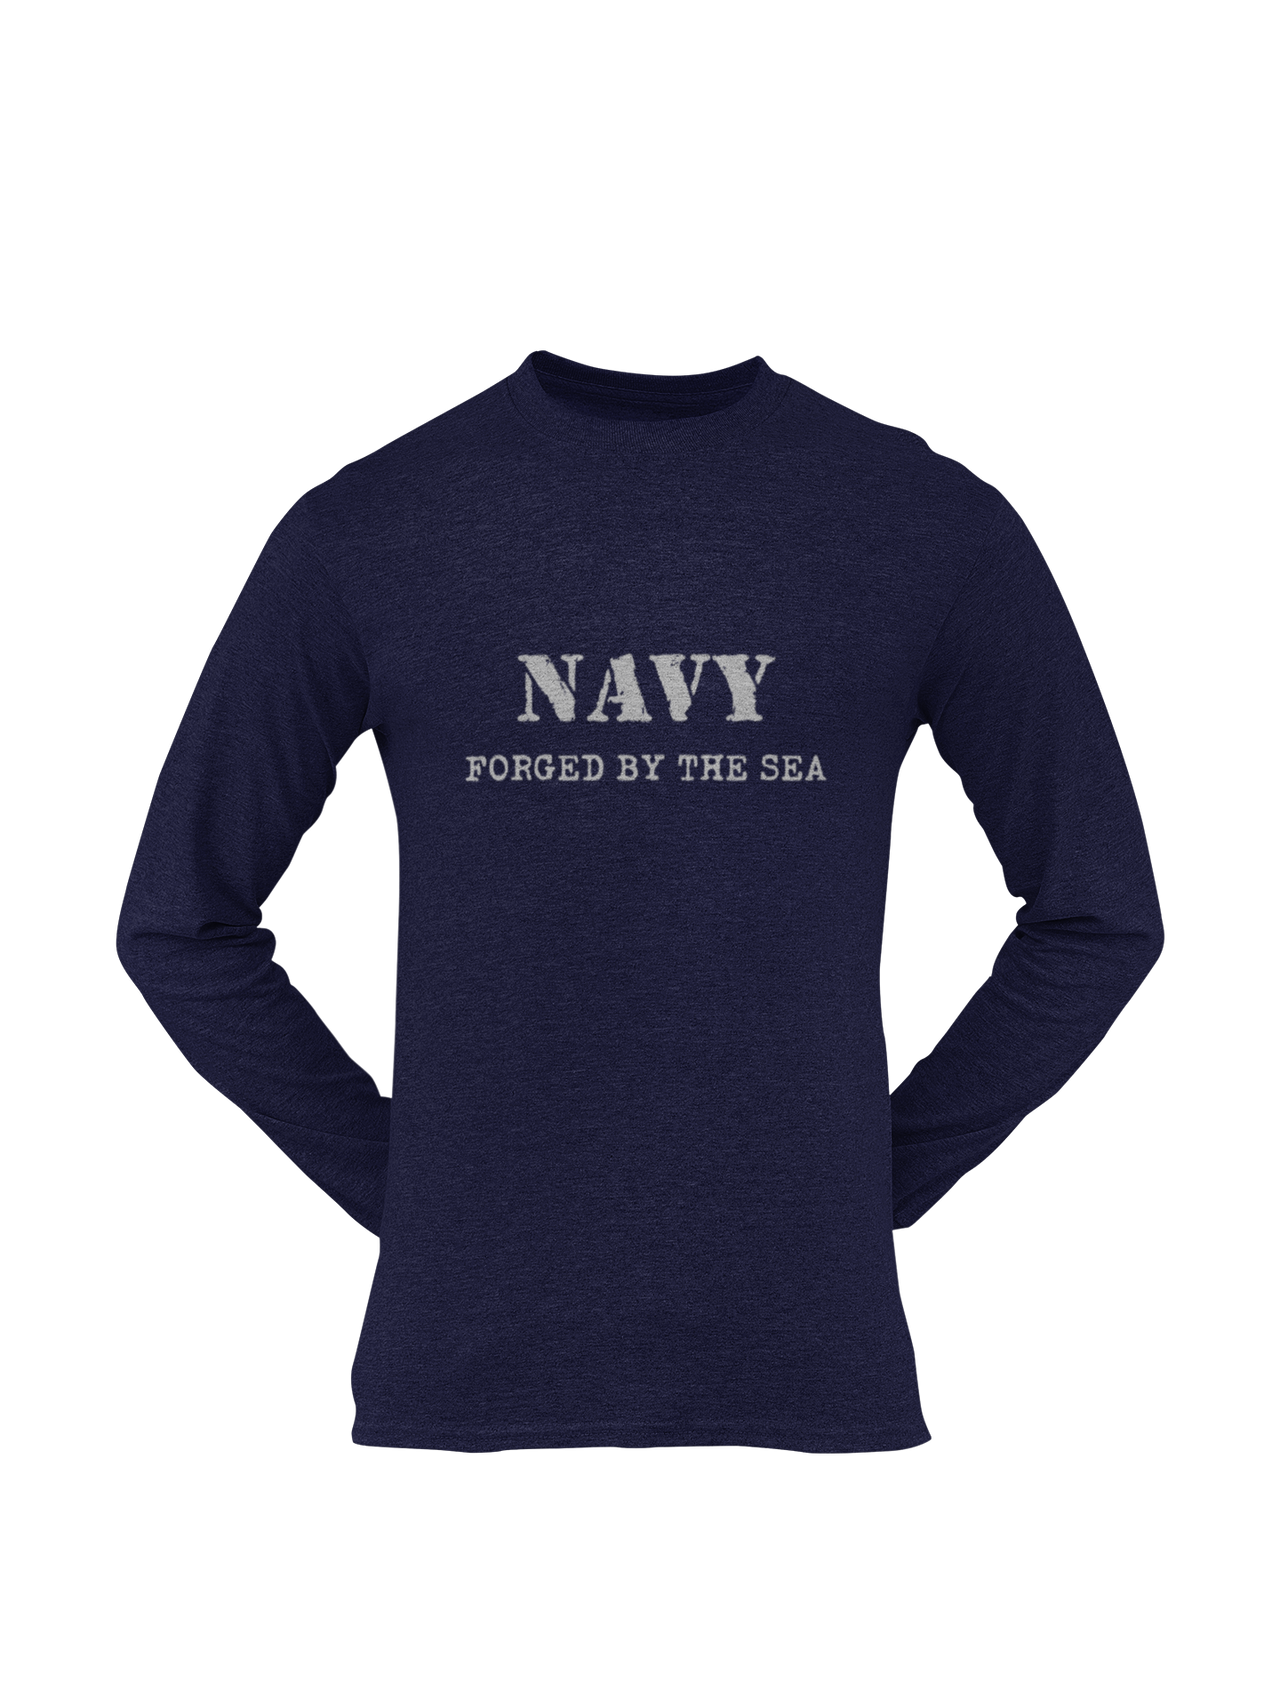 Navy T-shirt - Navy, Forged By The Sea (Men)